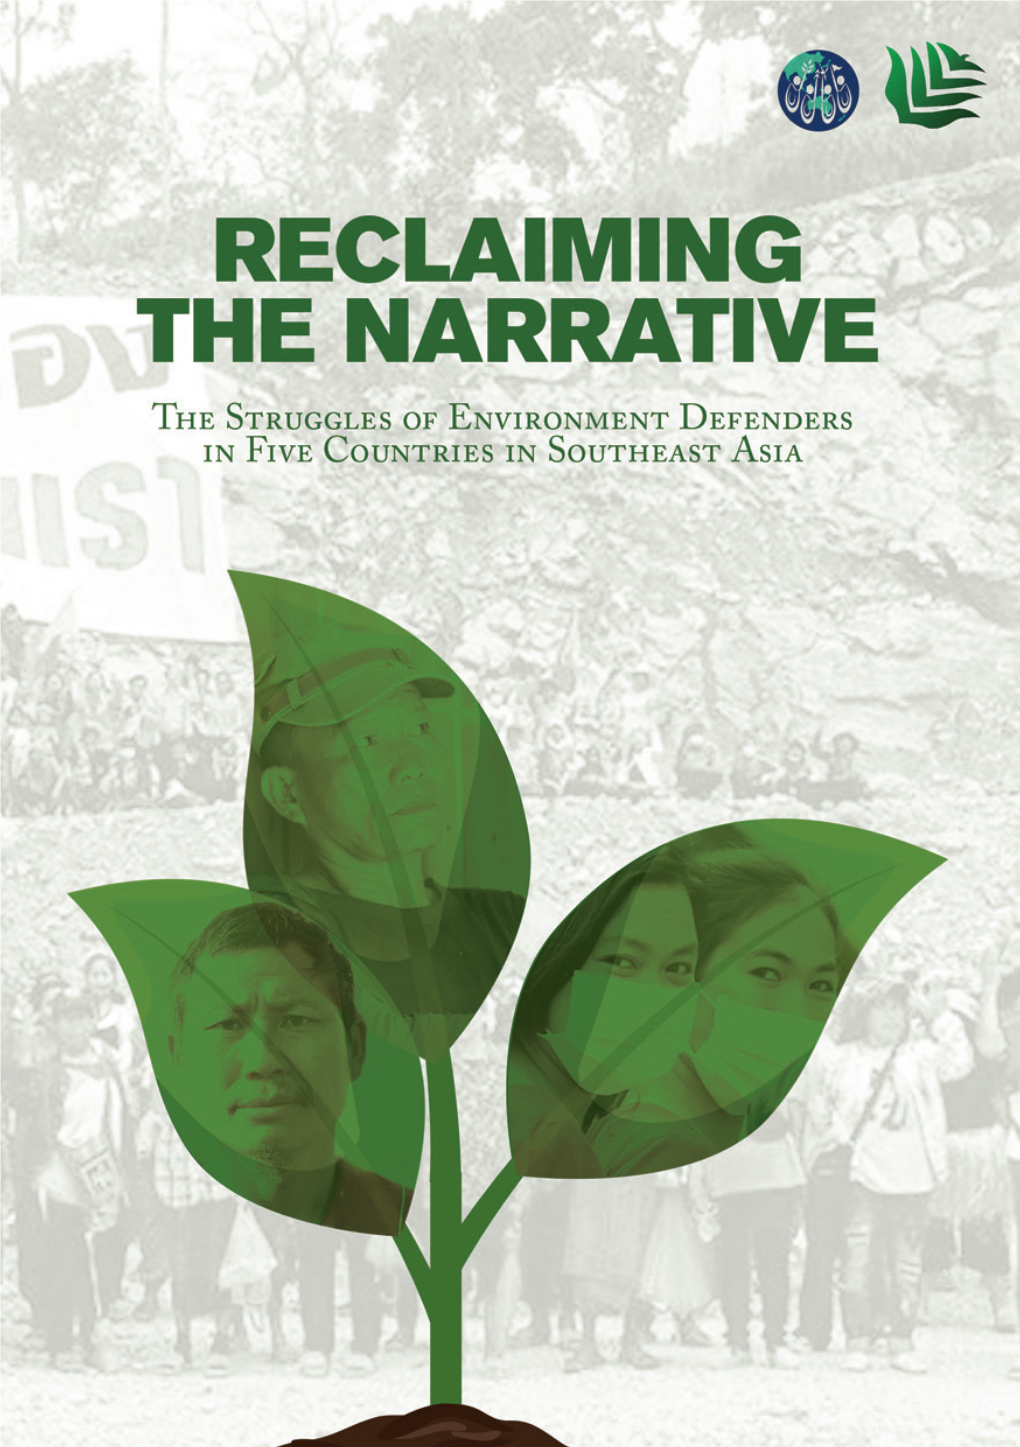 Reclaiming the Narrative the STRUGGLES of ENVIRONMENT DEFENDERS in FIVE COUNTRIES in SOUTHEAST ASIA